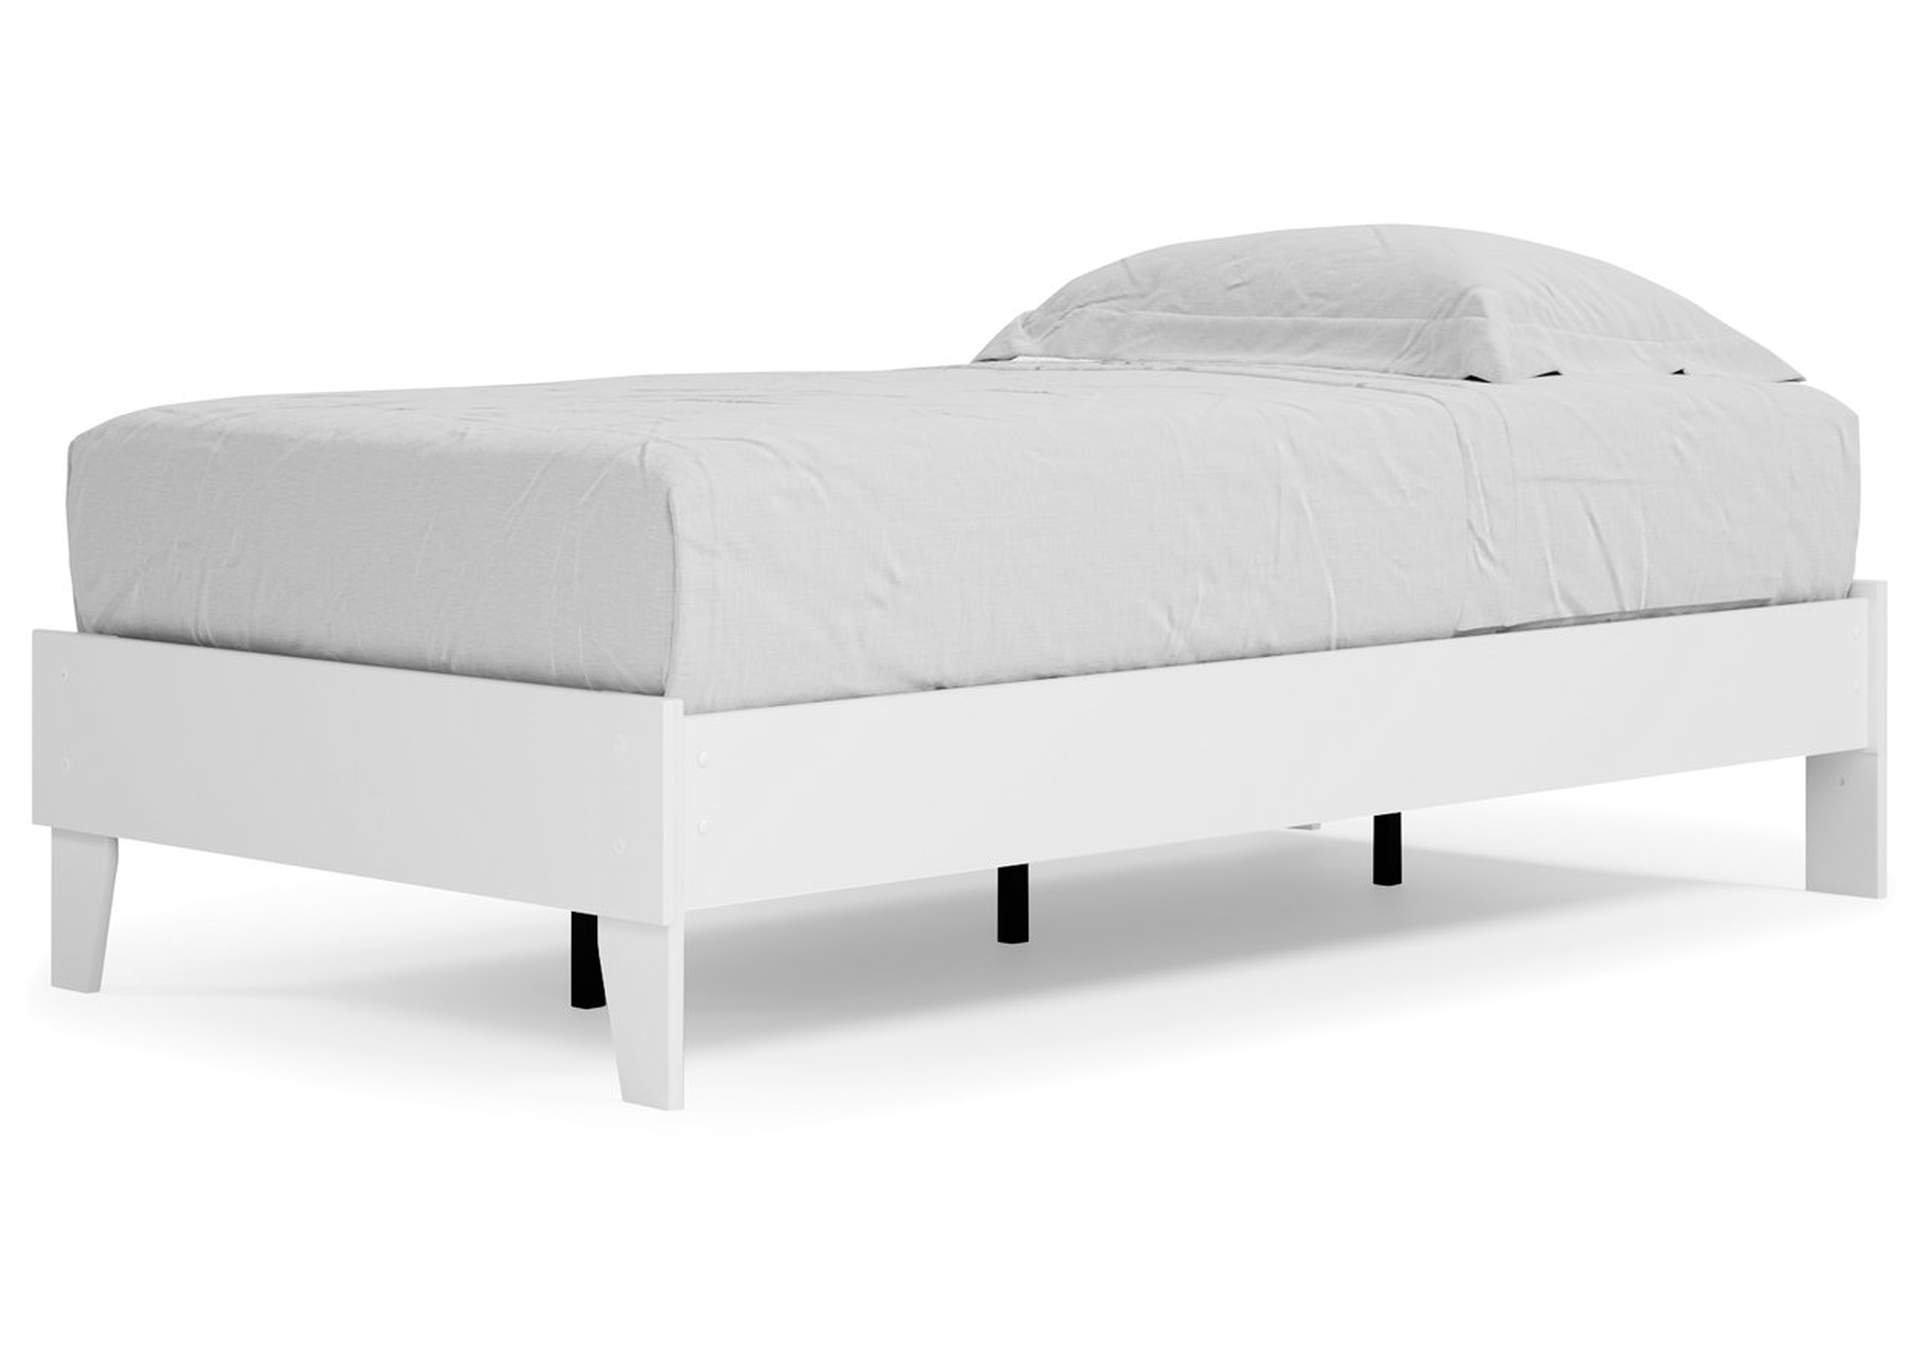 Piperton Twin Platform Bed,Direct To Consumer Express